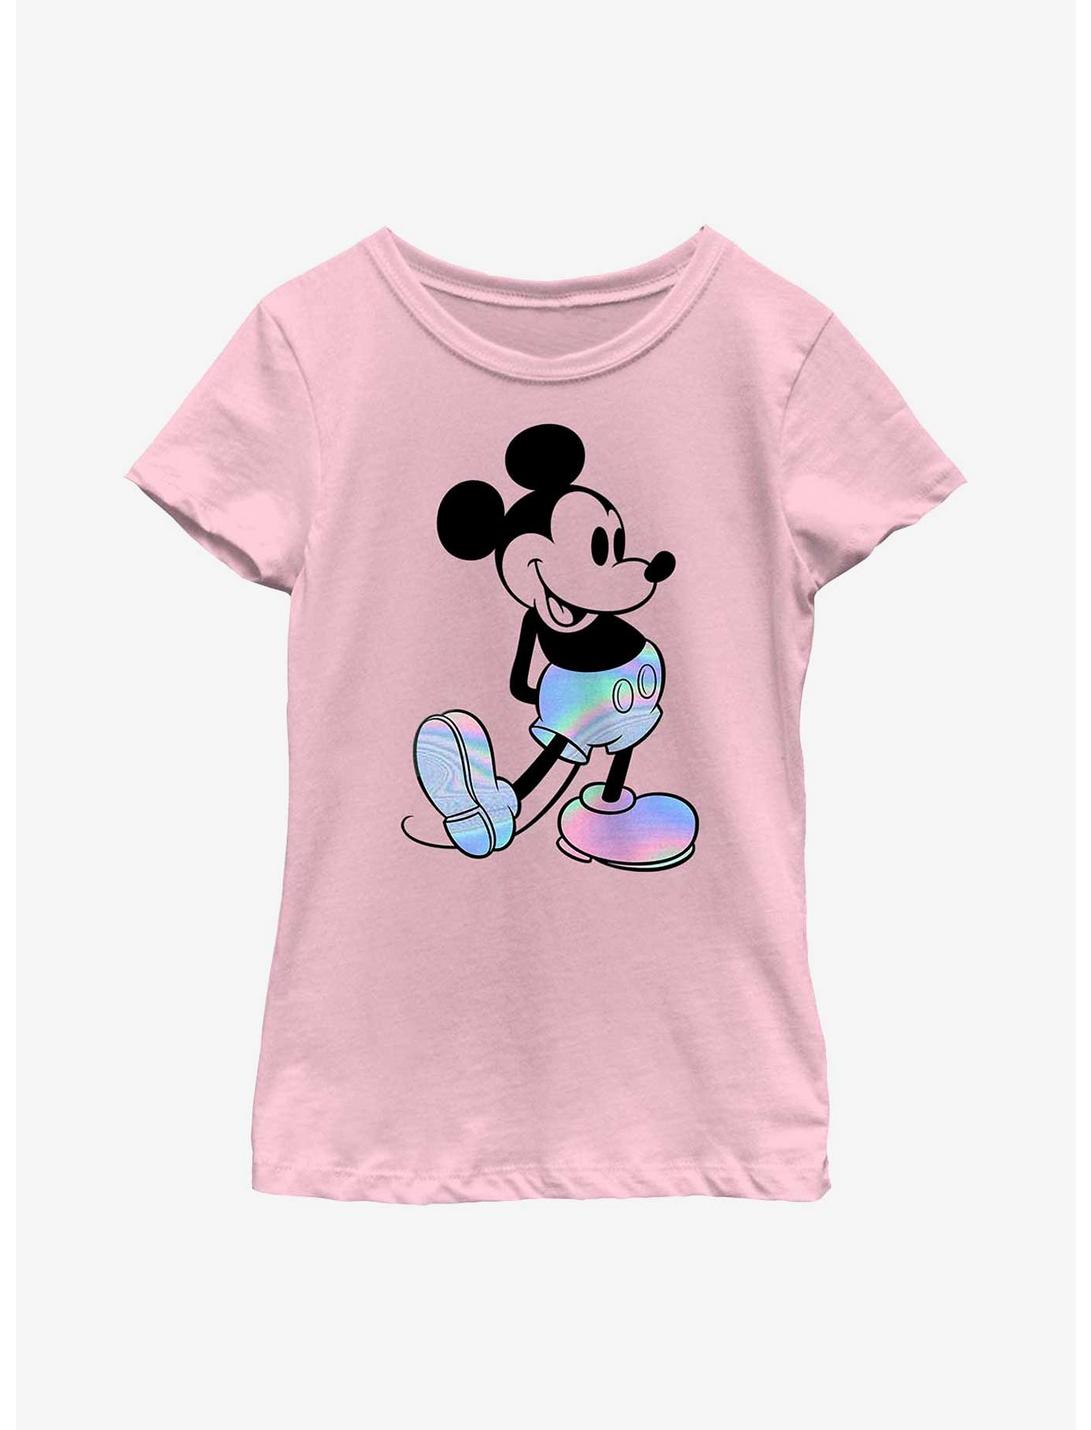 Disney Mickey Mouse Groovy Portrait Youth Girls T-Shirt, PINK, hi-res